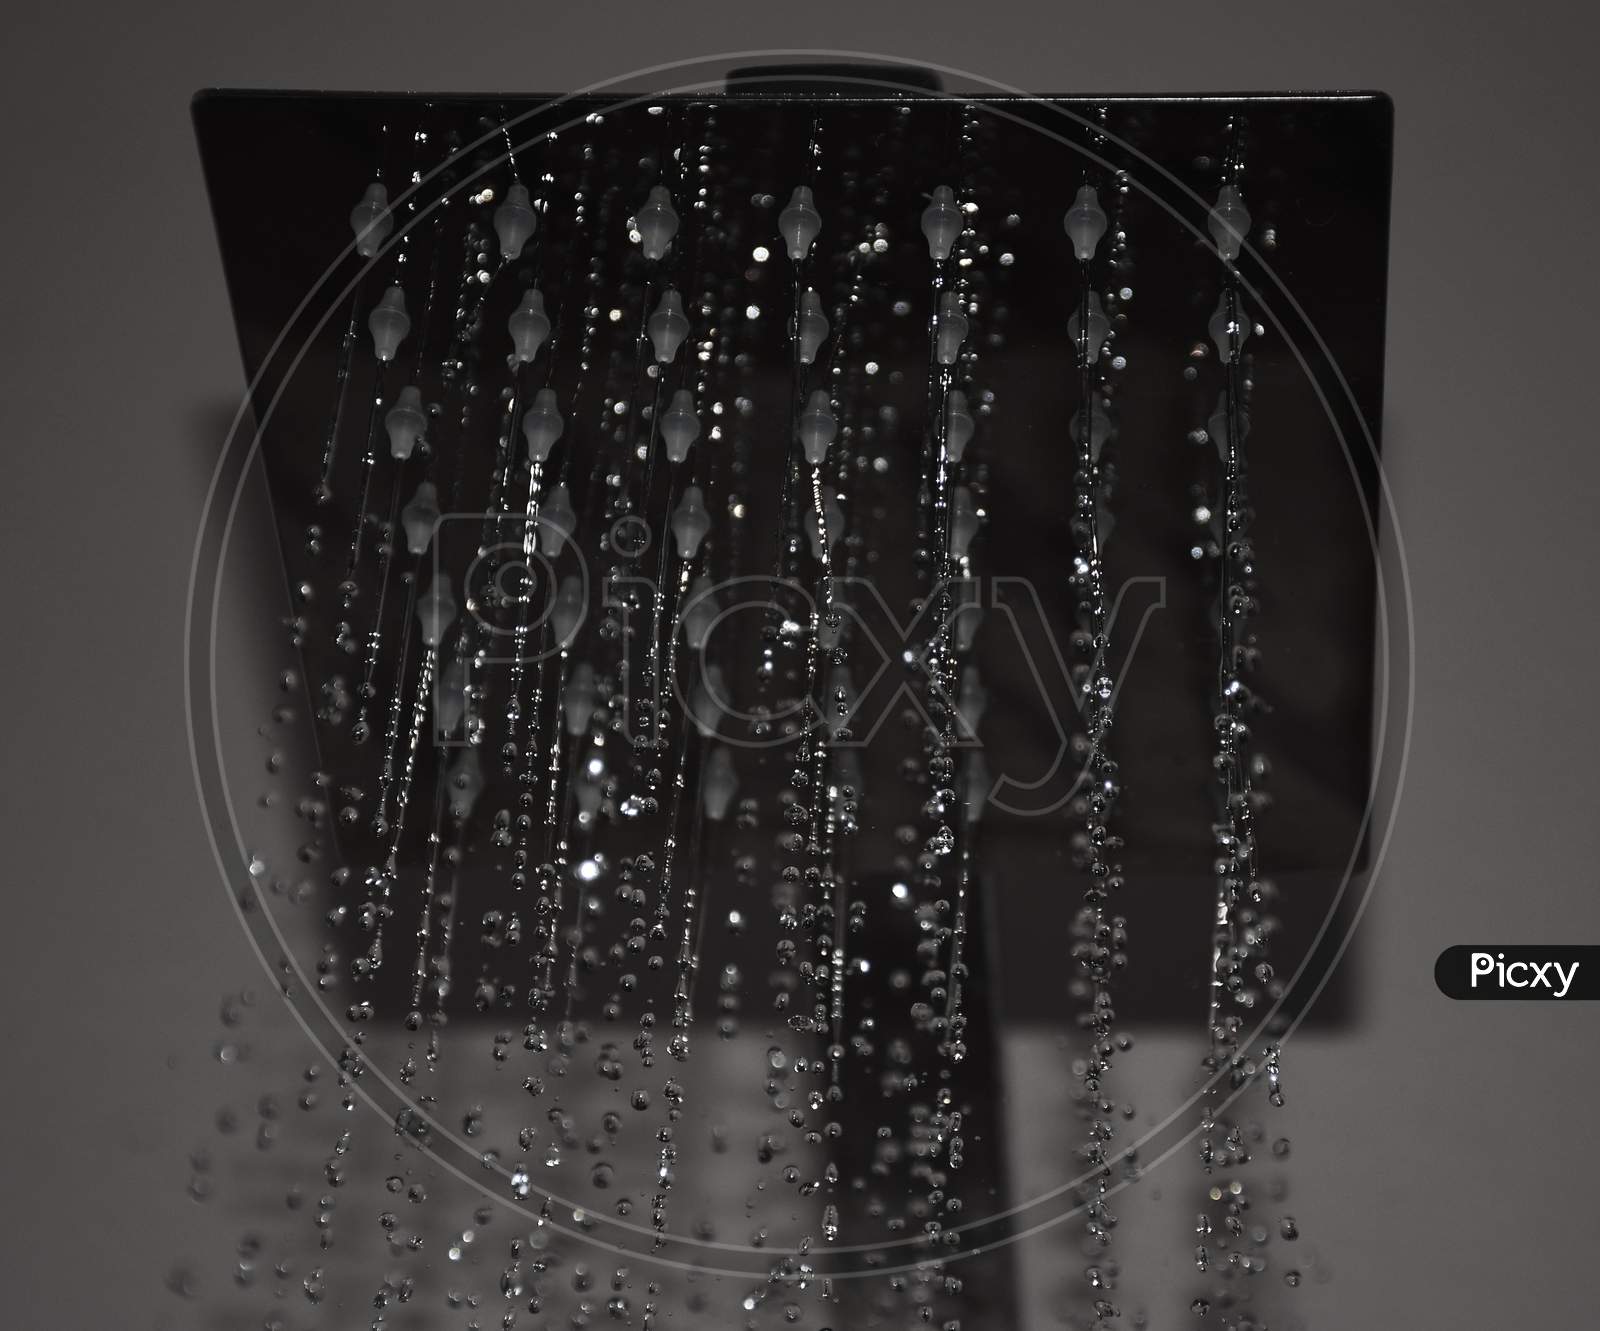 Closeup of a shower head with sprinkling or splashing water